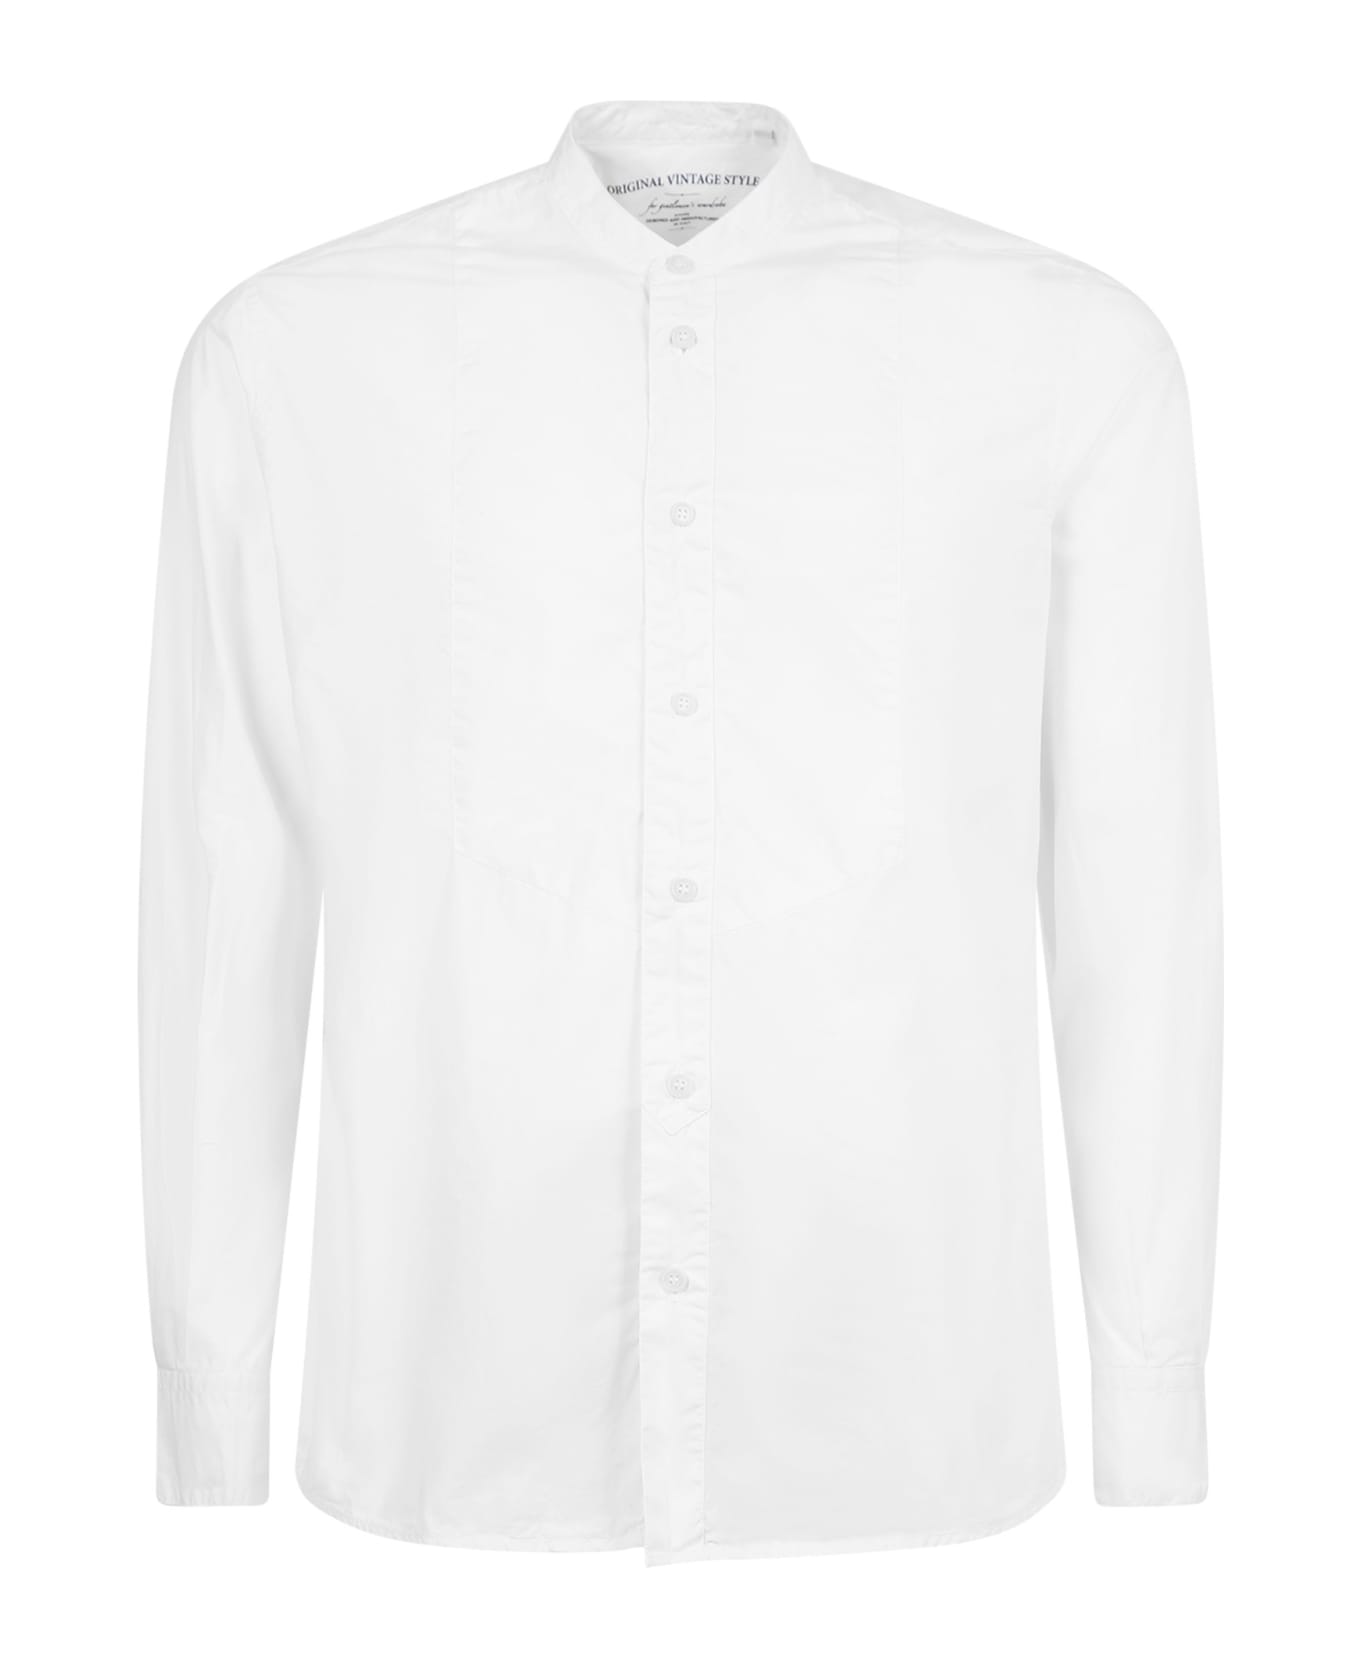 Original Vintage Style Relaxed Fit Shirt - White